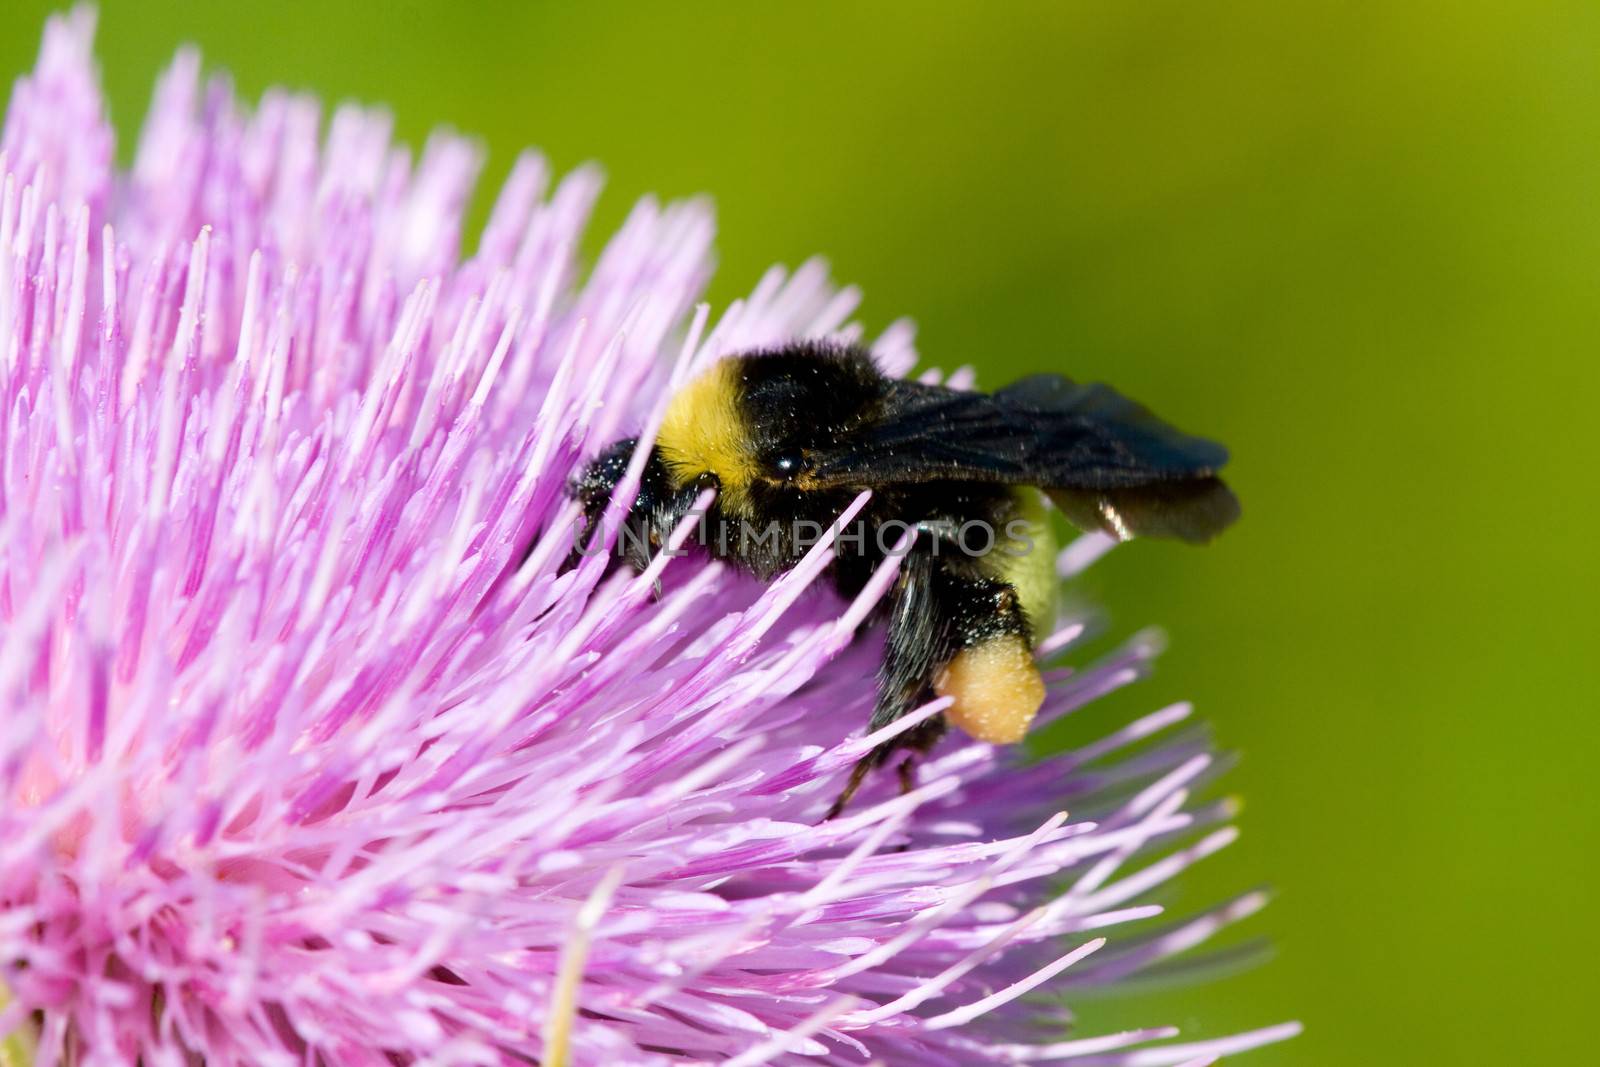 Close-up of a bee pollinating a pink thistle flower